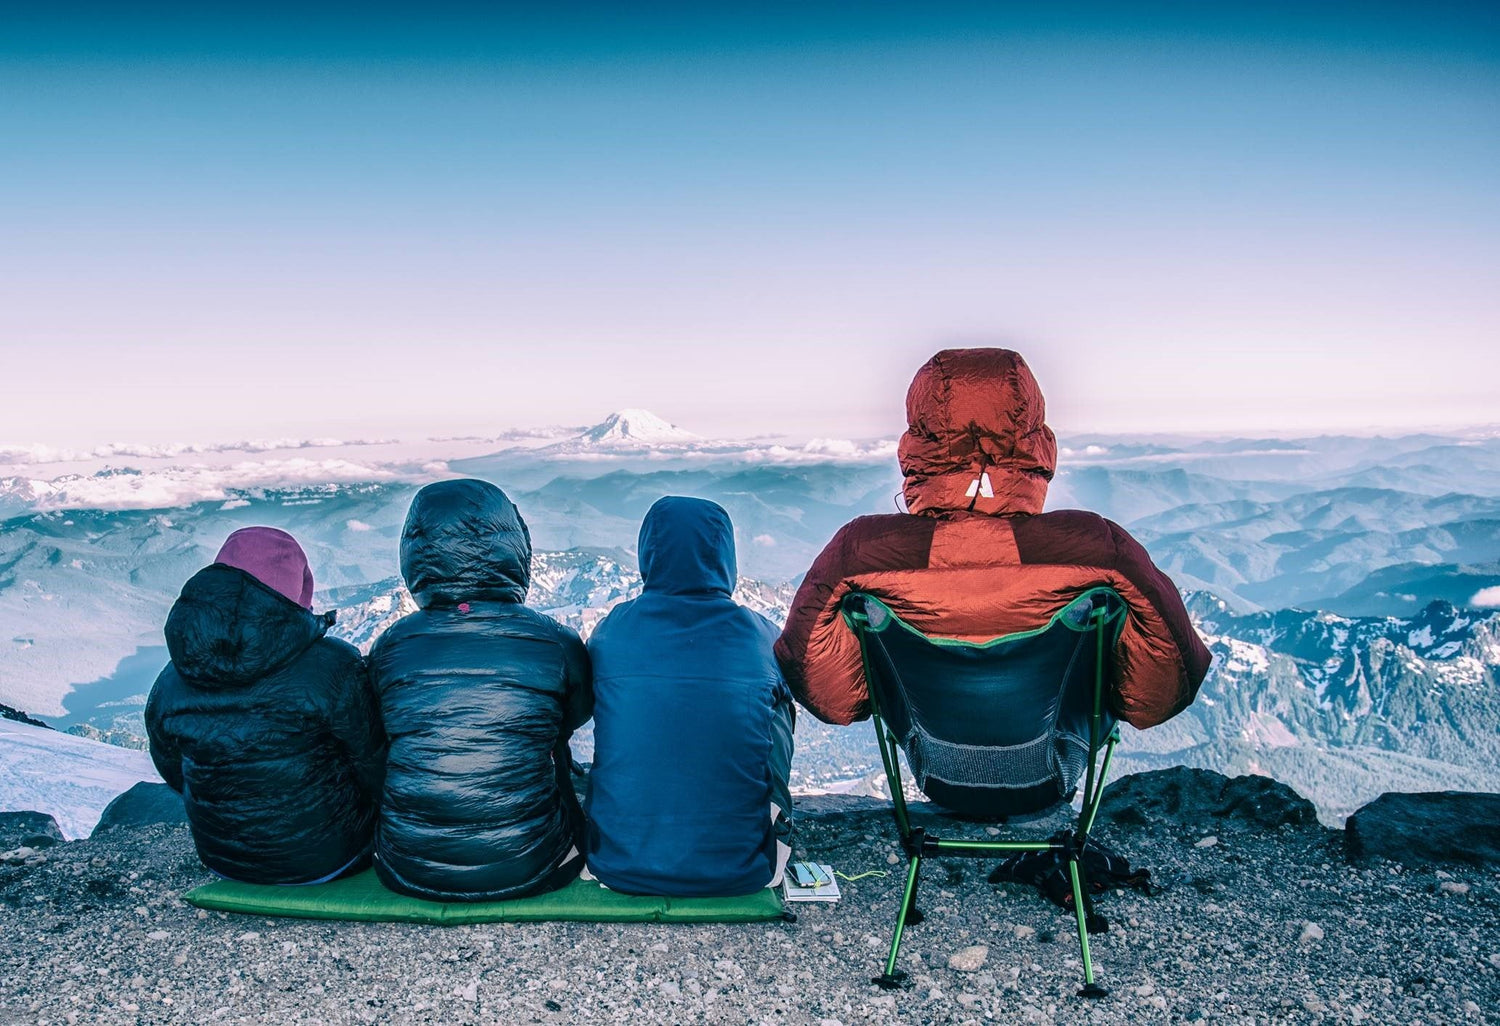 adult sitting in a travel chair on a mountain top with three kids sitting on a mat overlooking mountains with snow on them.